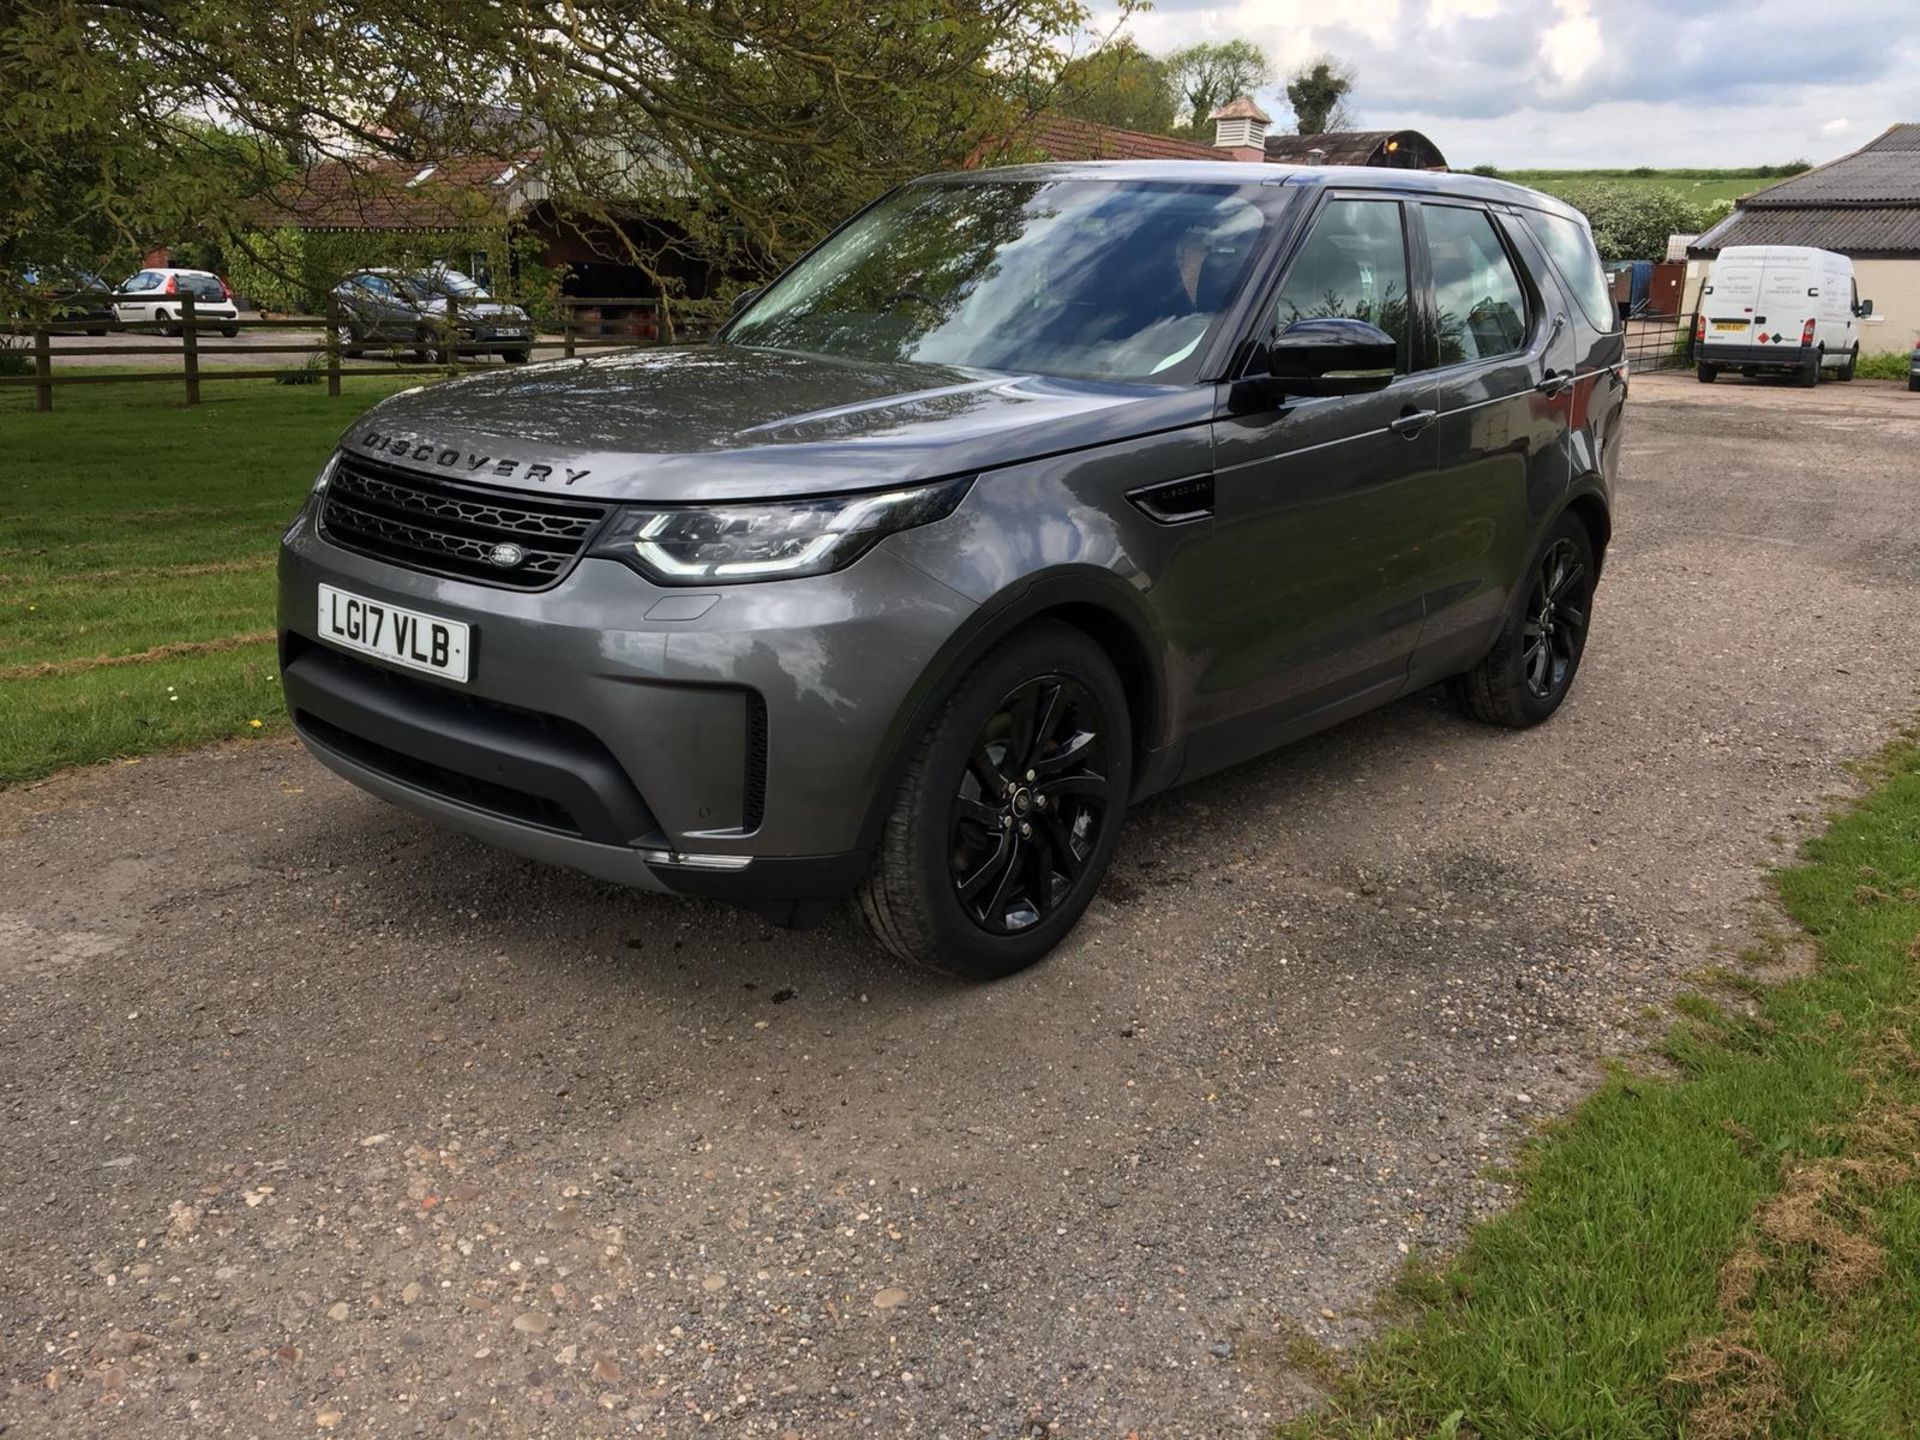 2017 REG LANDROVER DISCOVERY 5 TD6 HSE AUTO 2017 NEW SHAPE - Image 3 of 17